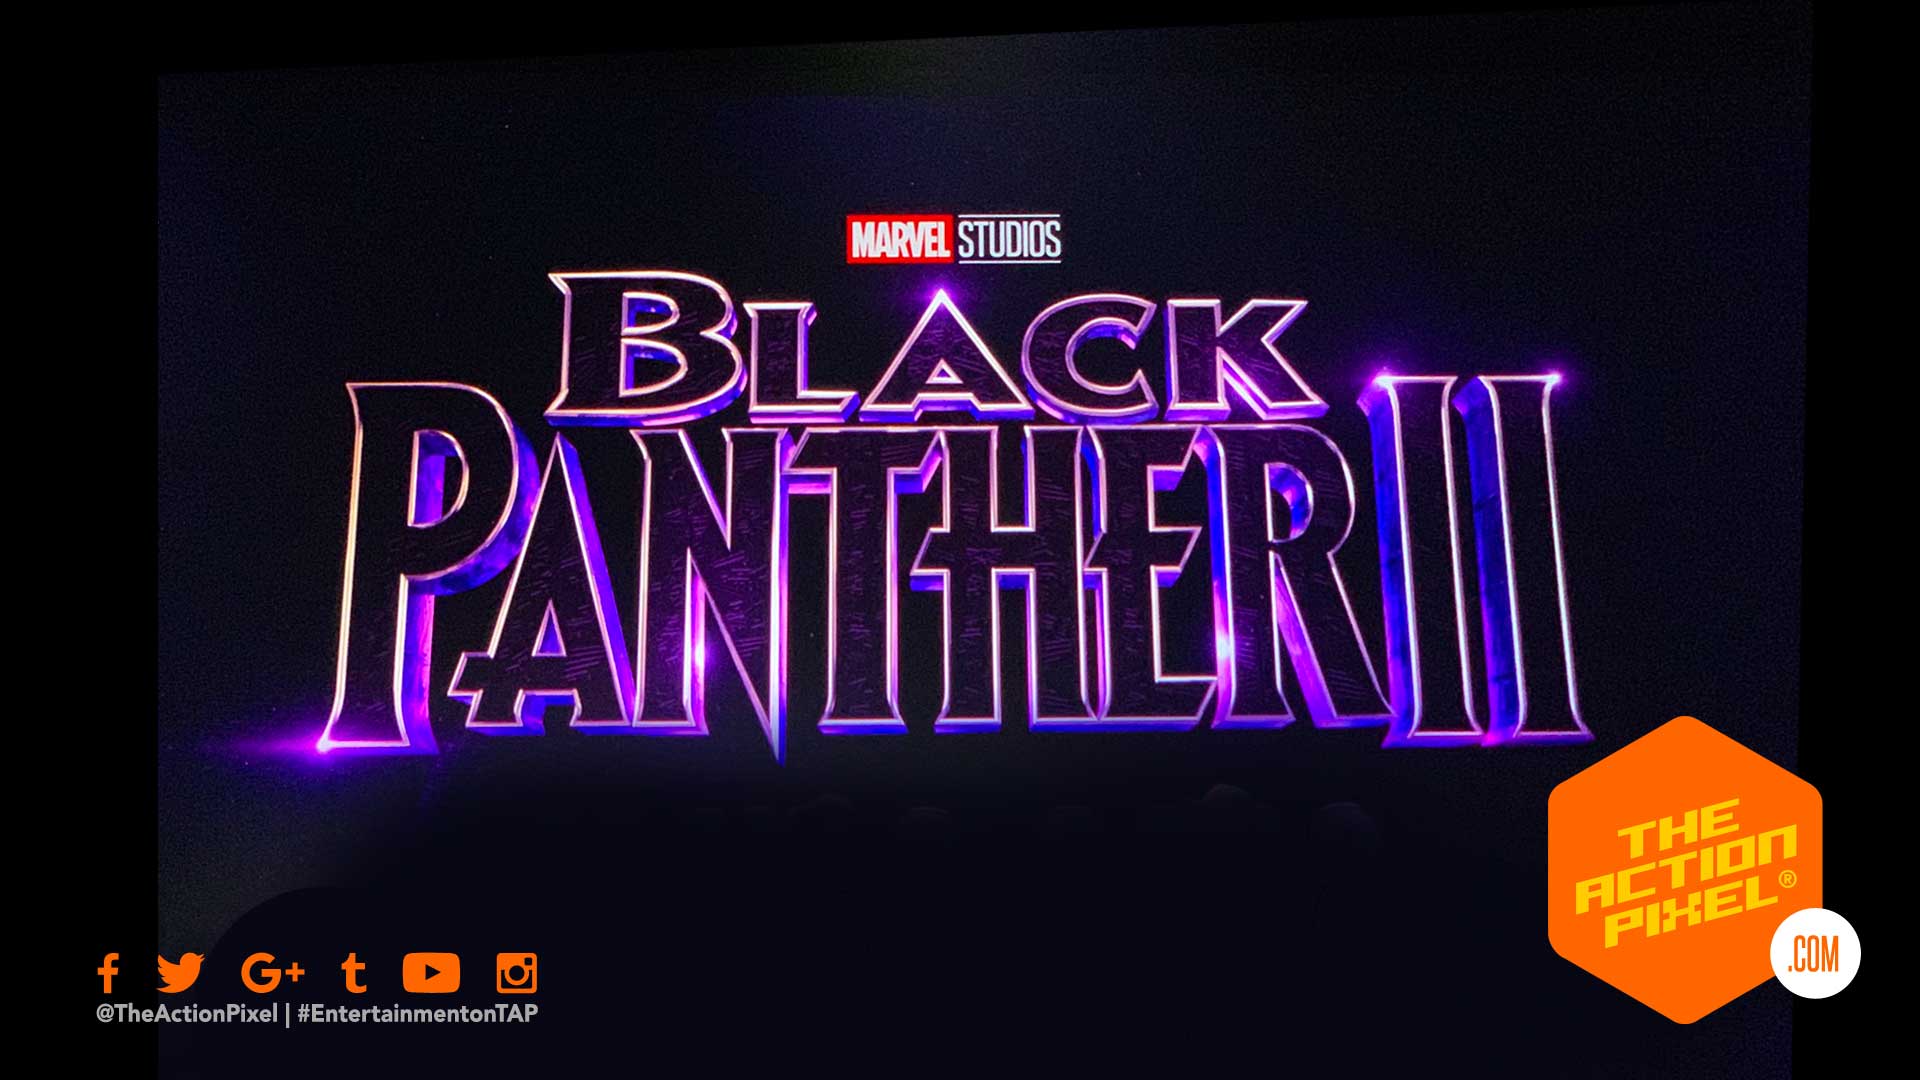 Black Panther 2” is slated for cinematic release in 2022